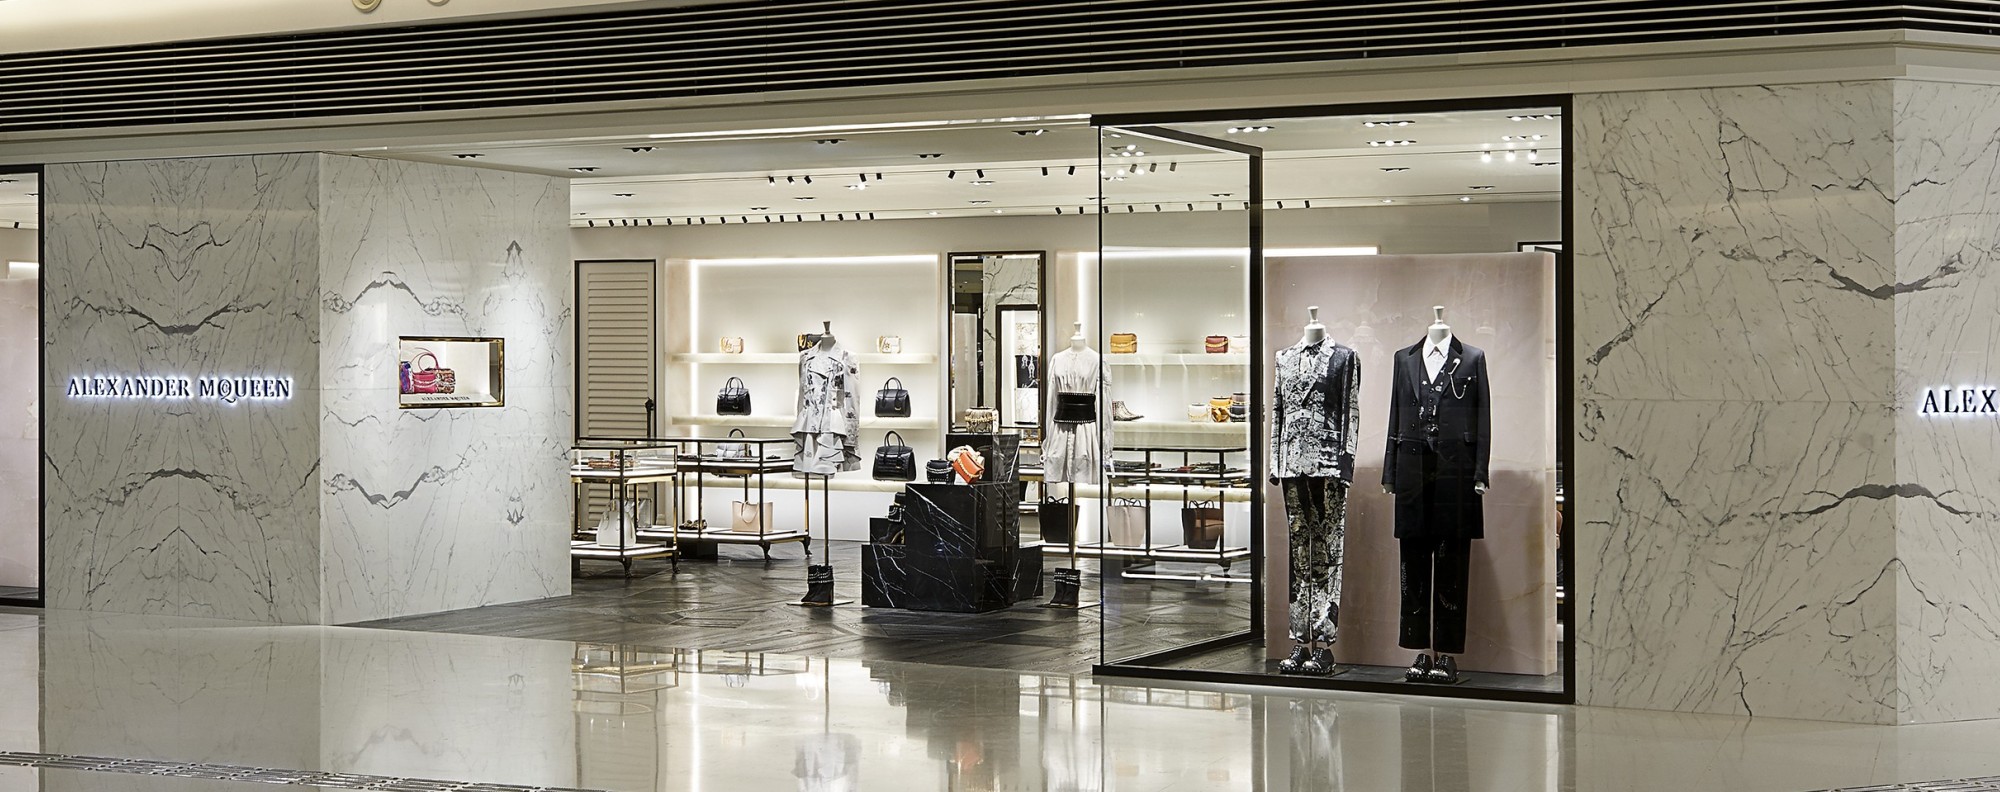 Alexander store opens Elements | South China Post